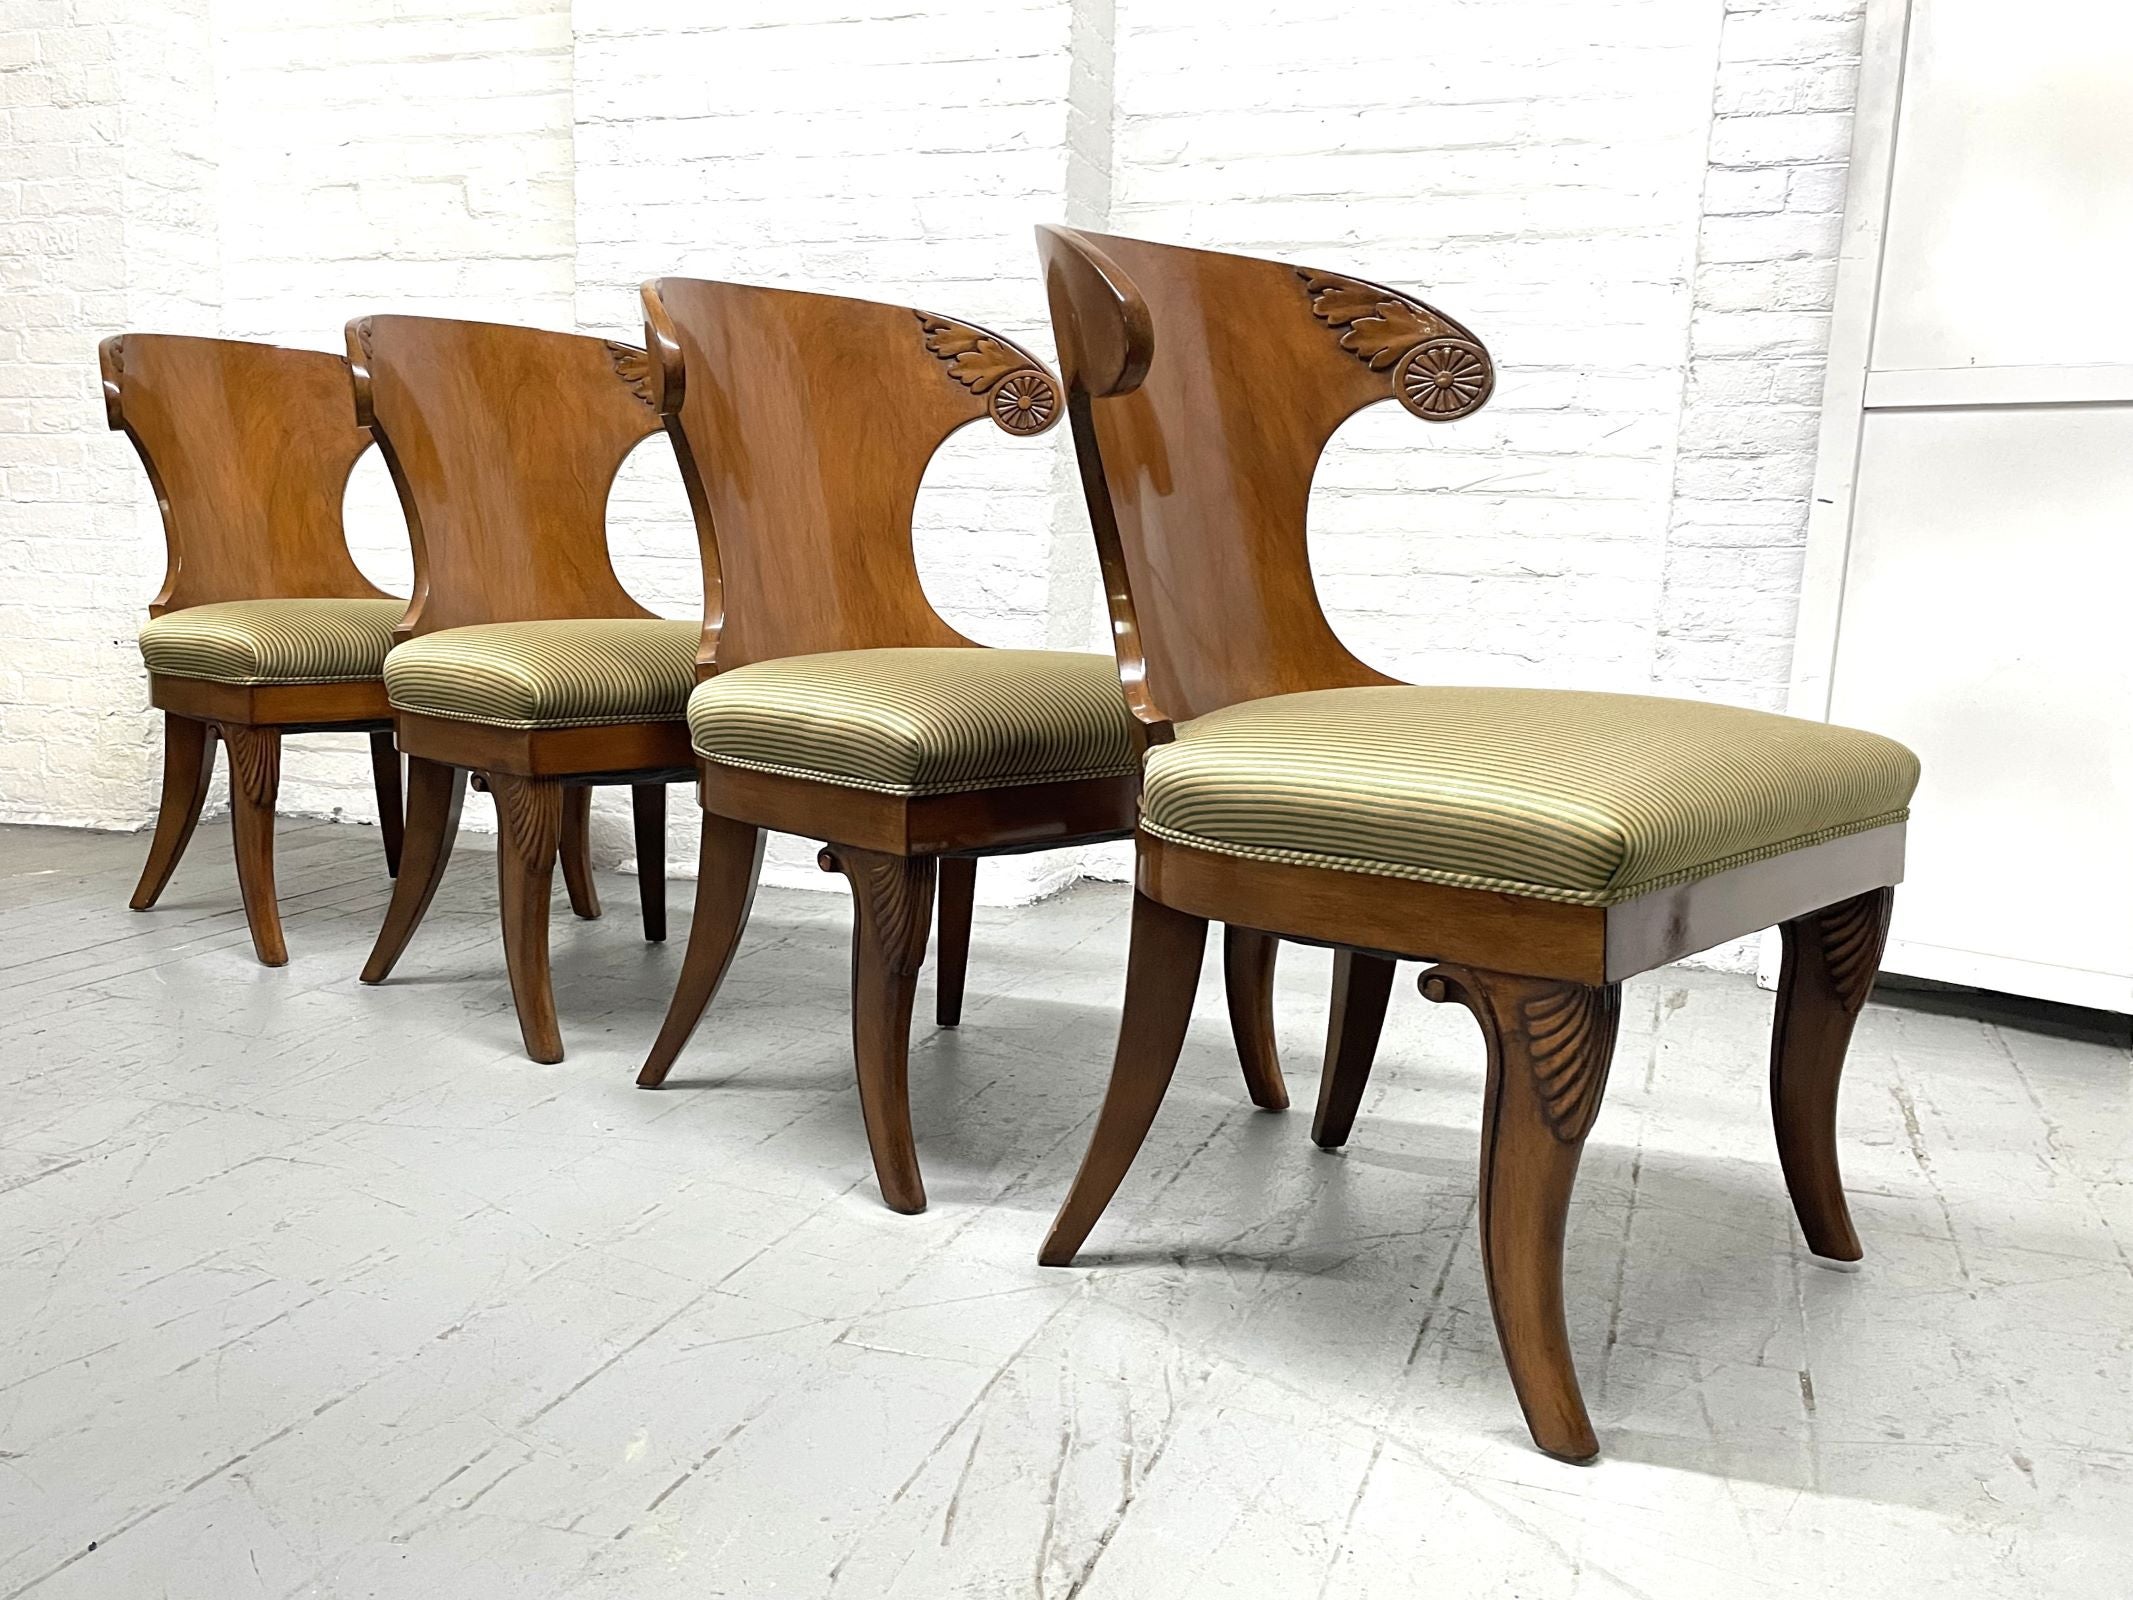 Set of 4 Klismos Style Solid Walnut Dining Chairs.  The chairs have cushioned seats, original fabric with a decorative carved pattern to the top sides of the chairs.